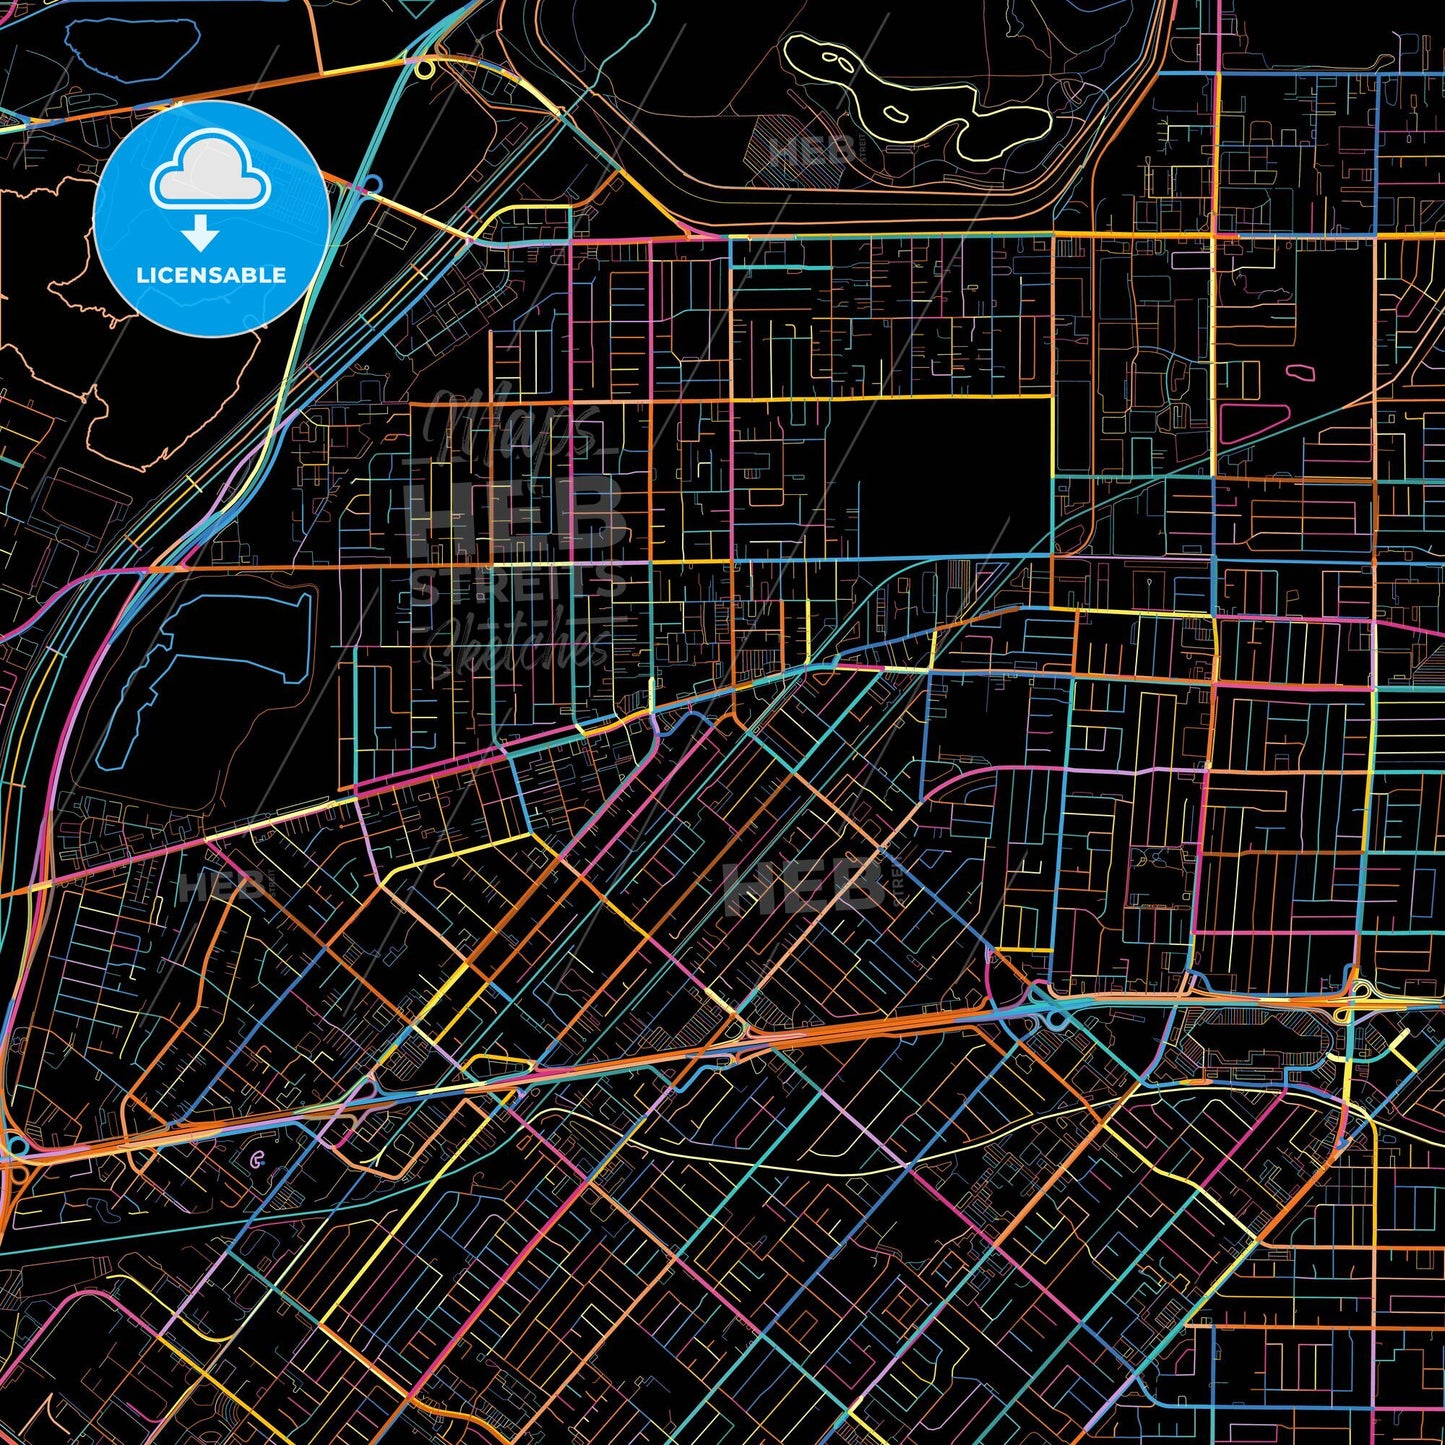 Baldwin Park, California, United States, colorful city map on black background